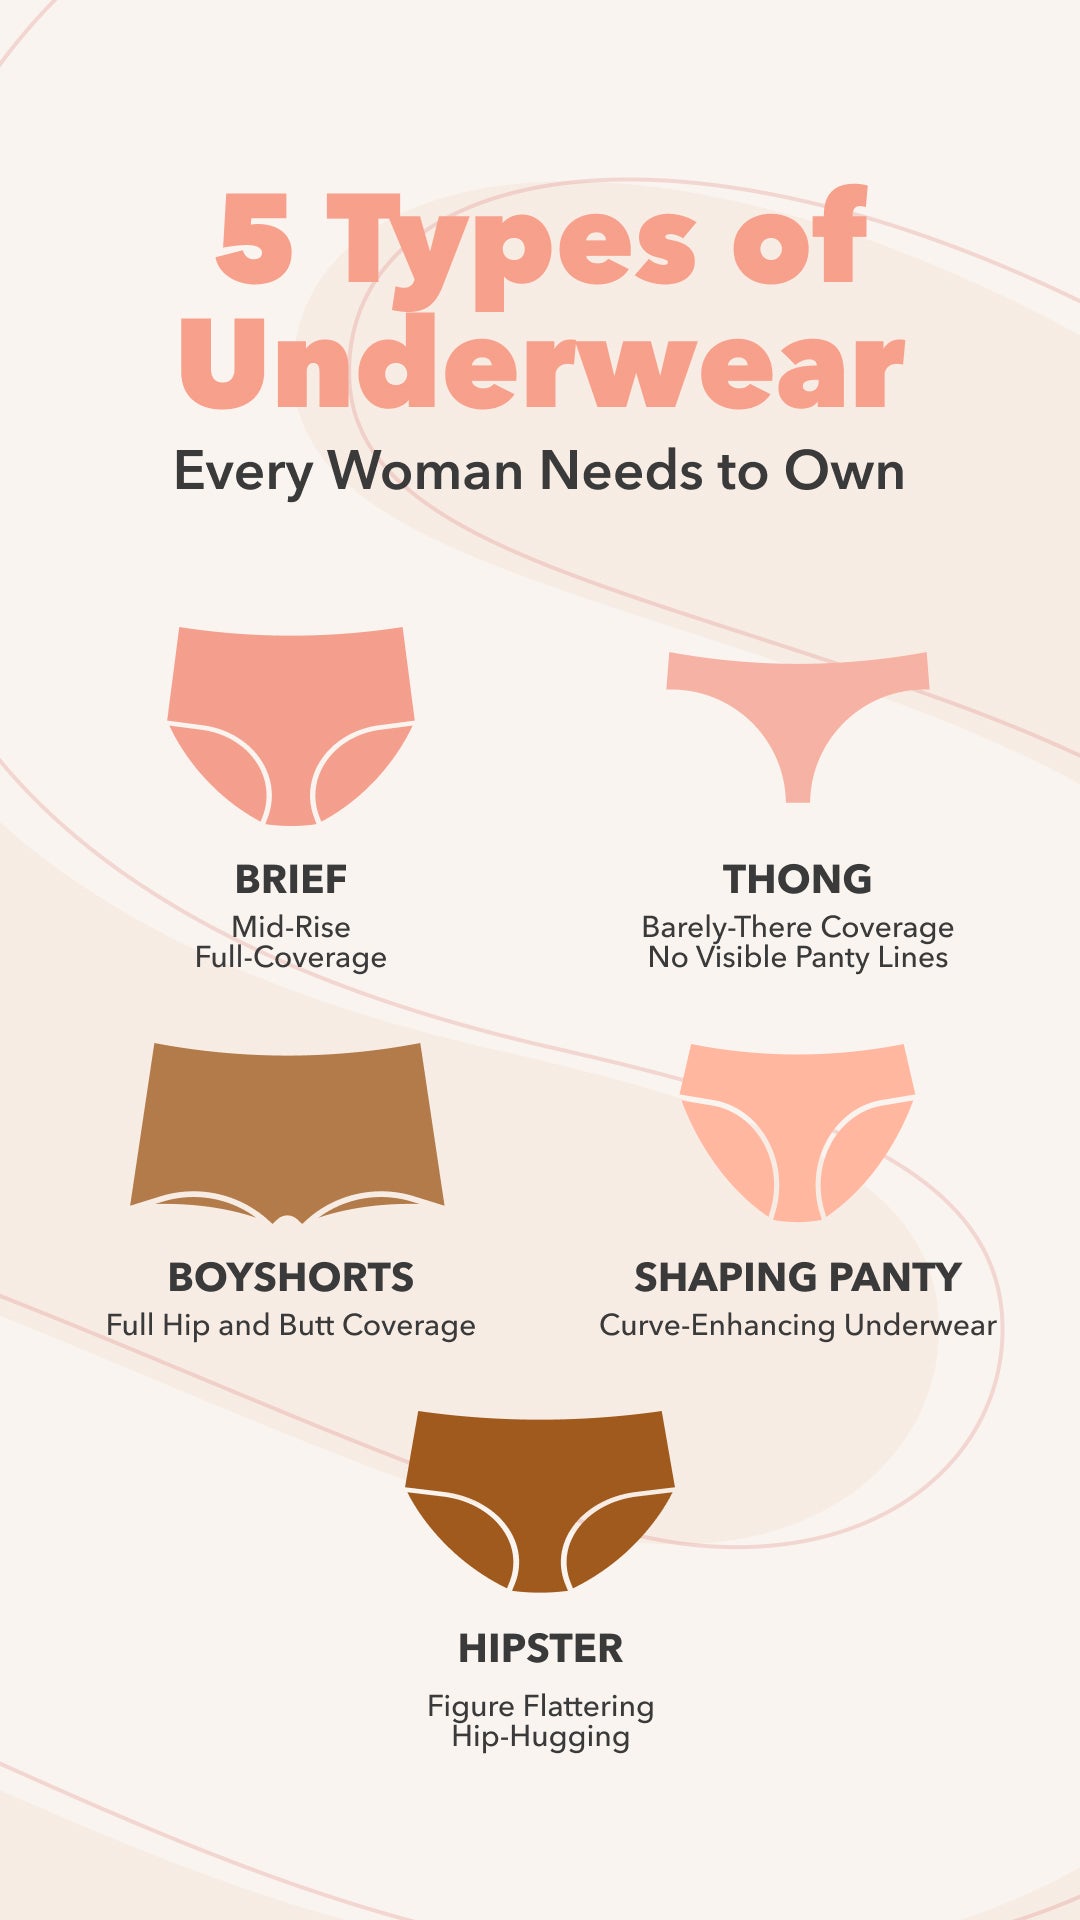 Find the right underwear style that fits and makes you feel most